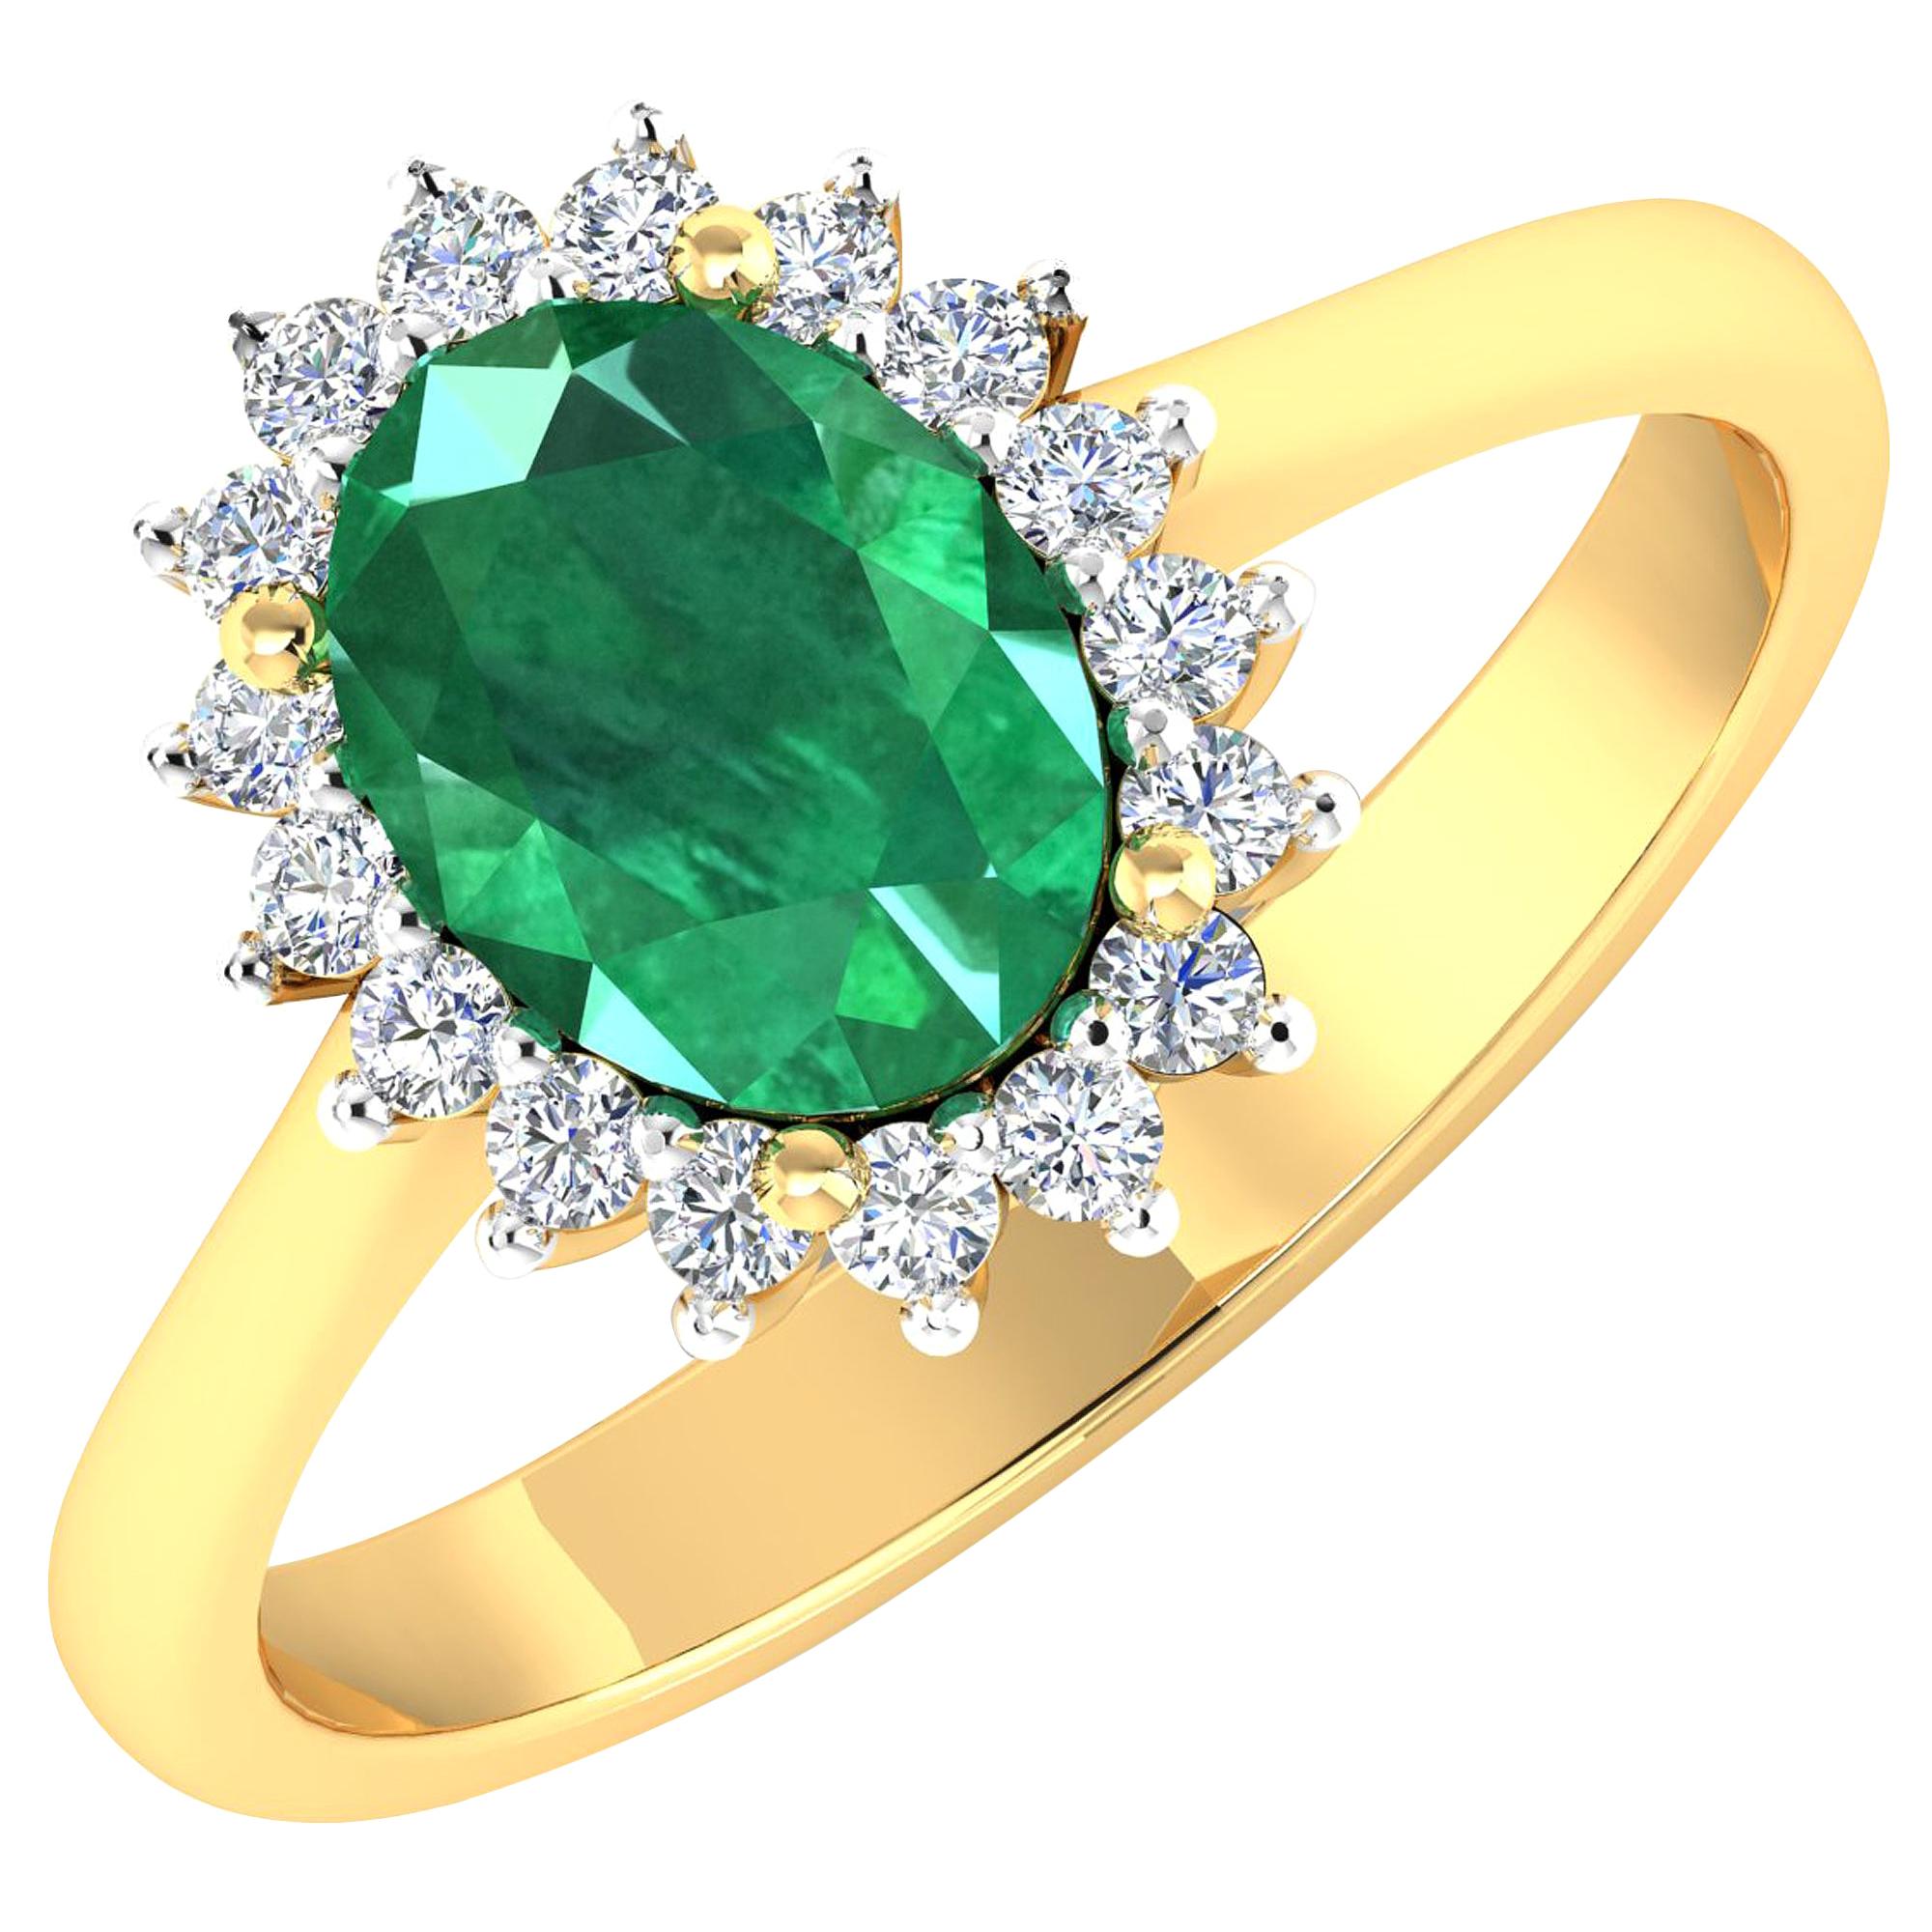 Emerald Gold Ring, 14 Karat Gold Emerald and Diamond Engagement Ring, 1.87 Carat For Sale